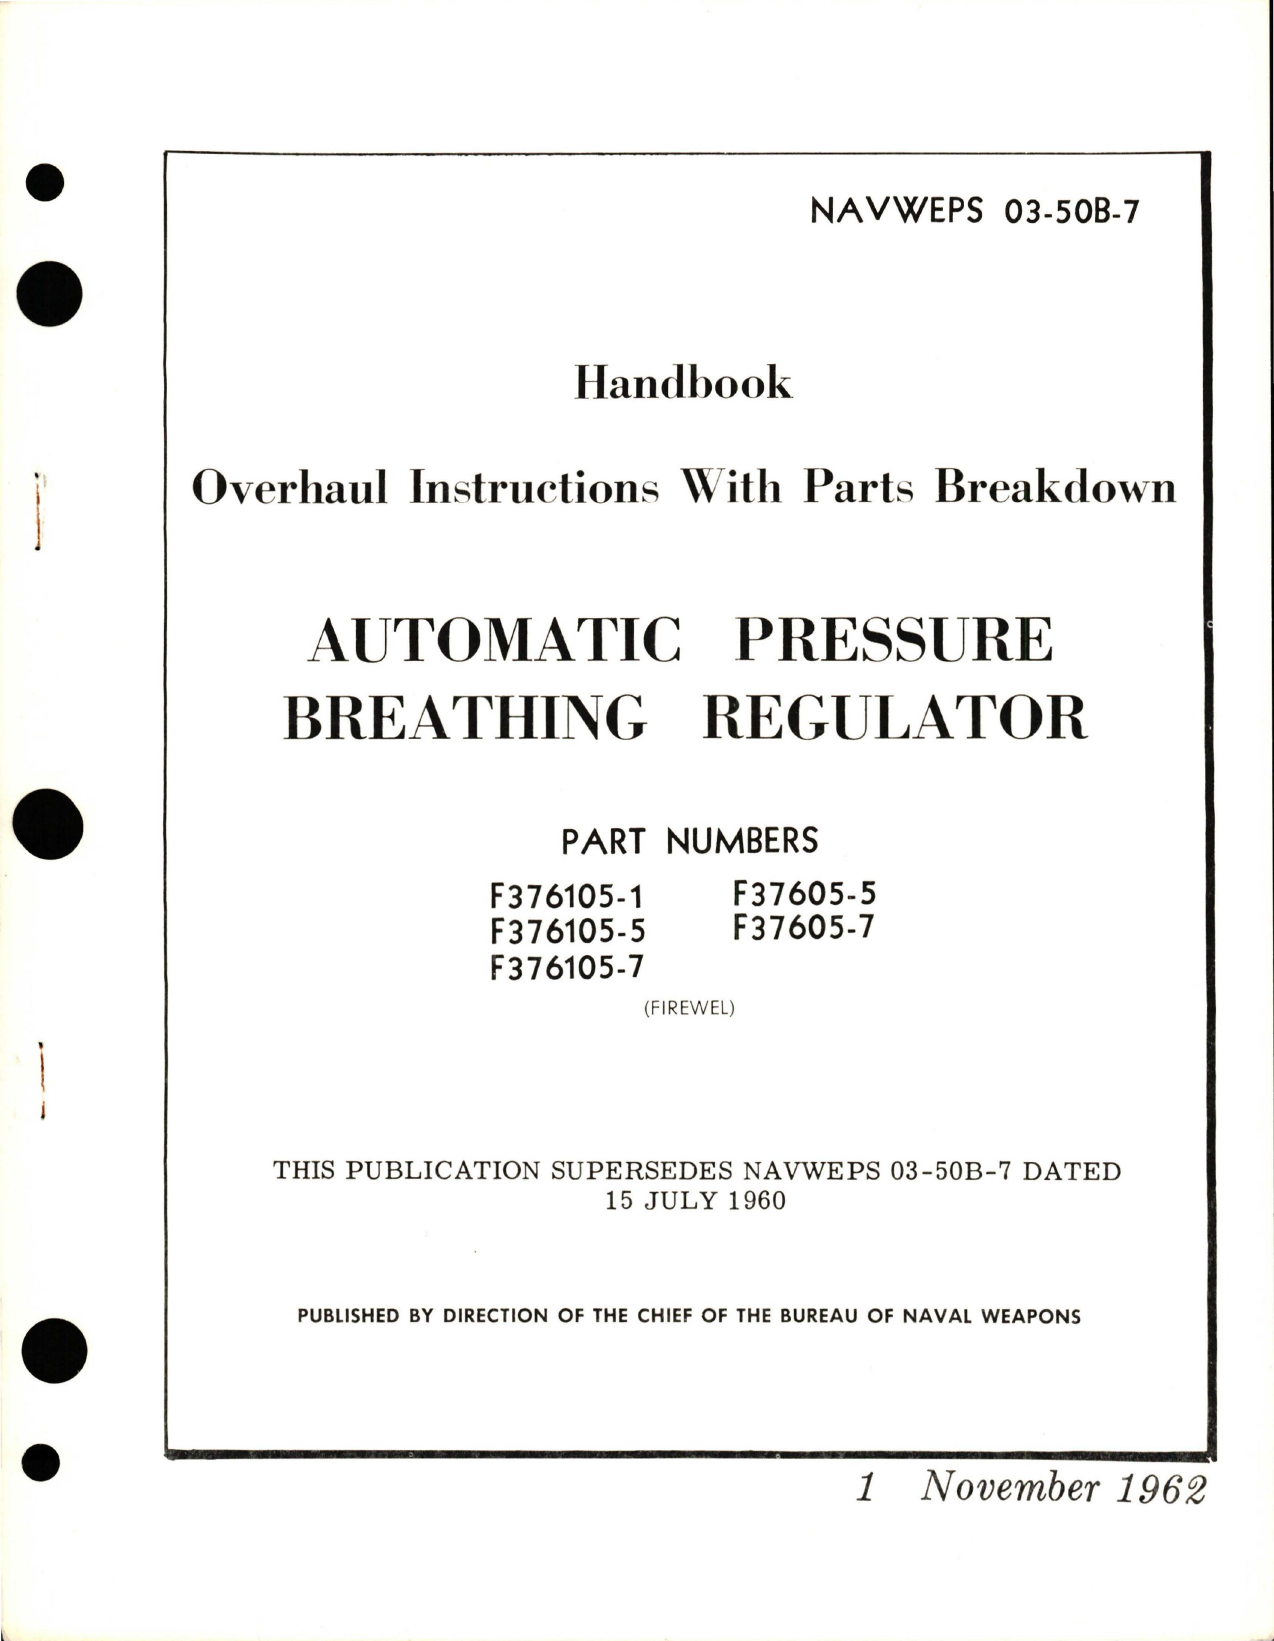 Sample page 1 from AirCorps Library document: Overhaul Instructions with Parts Breakdown for Automatic Pressure Breathing Regulator - Parts F376105-1, F376105-5, F376105-7, F37605-5, and F37605-7